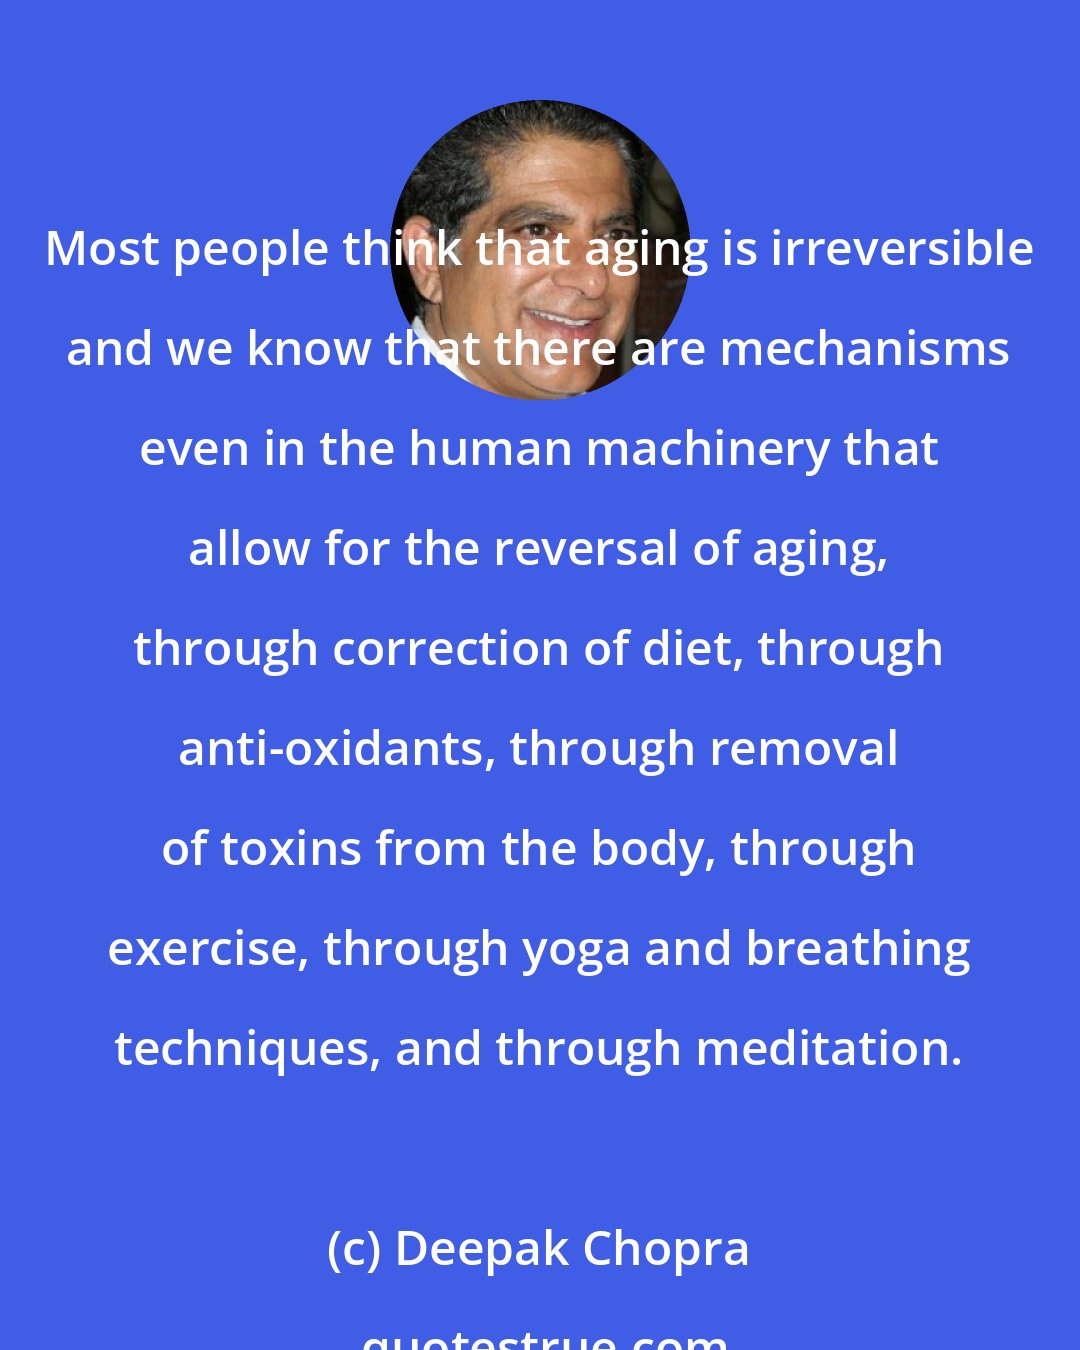 Deepak Chopra: Most people think that aging is irreversible and we know that there are mechanisms even in the human machinery that allow for the reversal of aging, through correction of diet, through anti-oxidants, through removal of toxins from the body, through exercise, through yoga and breathing techniques, and through meditation.